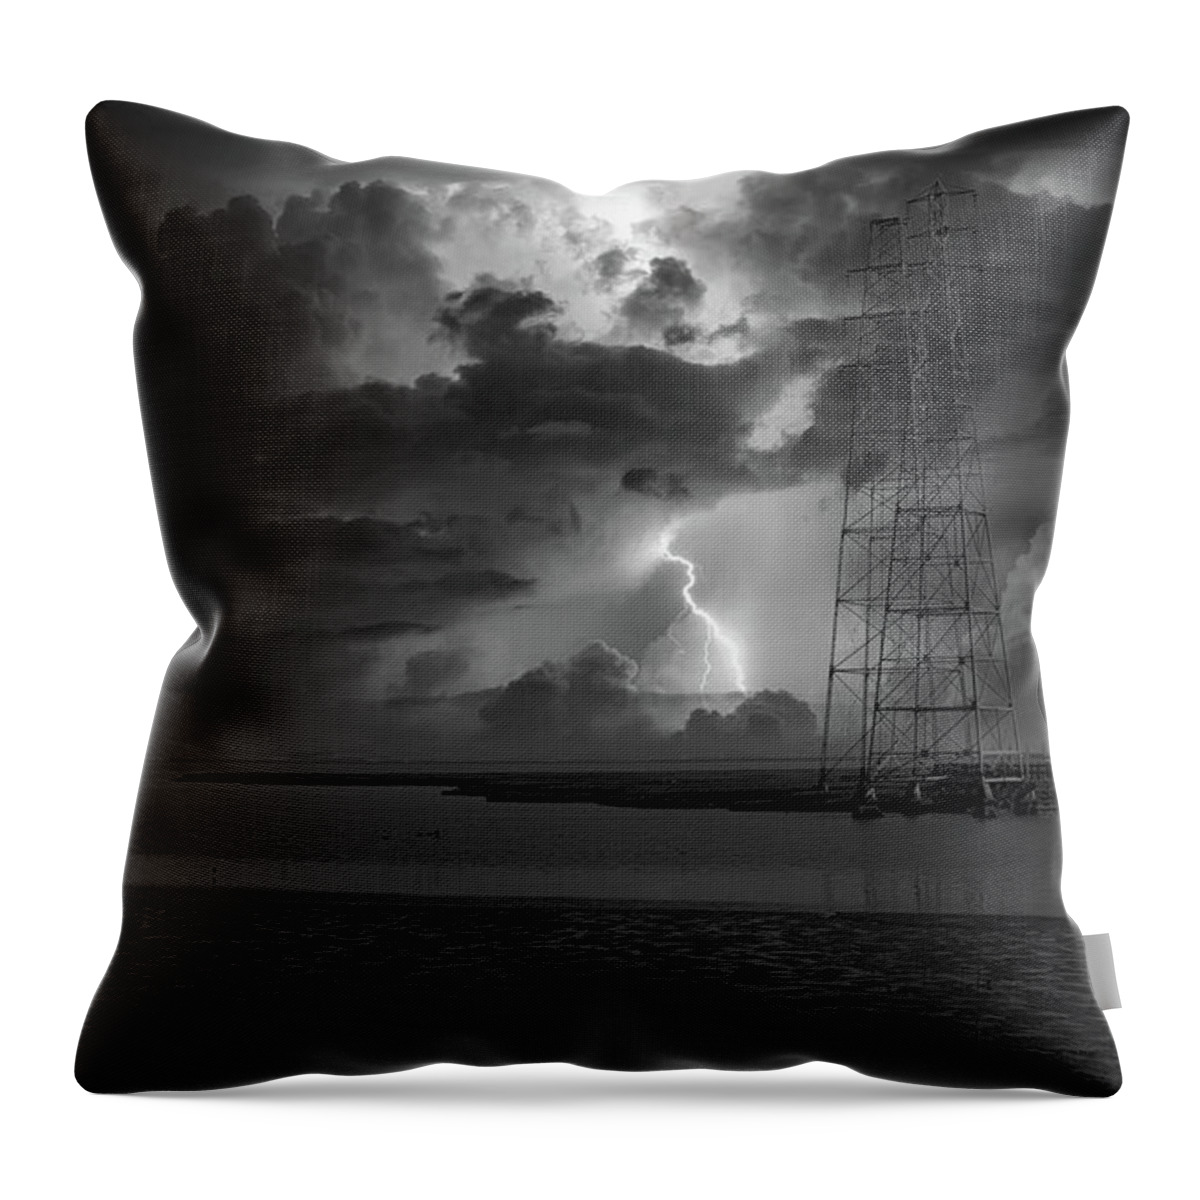 Powerlines Throw Pillow featuring the photograph Powerline Lightning Baylands California by Chuck Kuhn